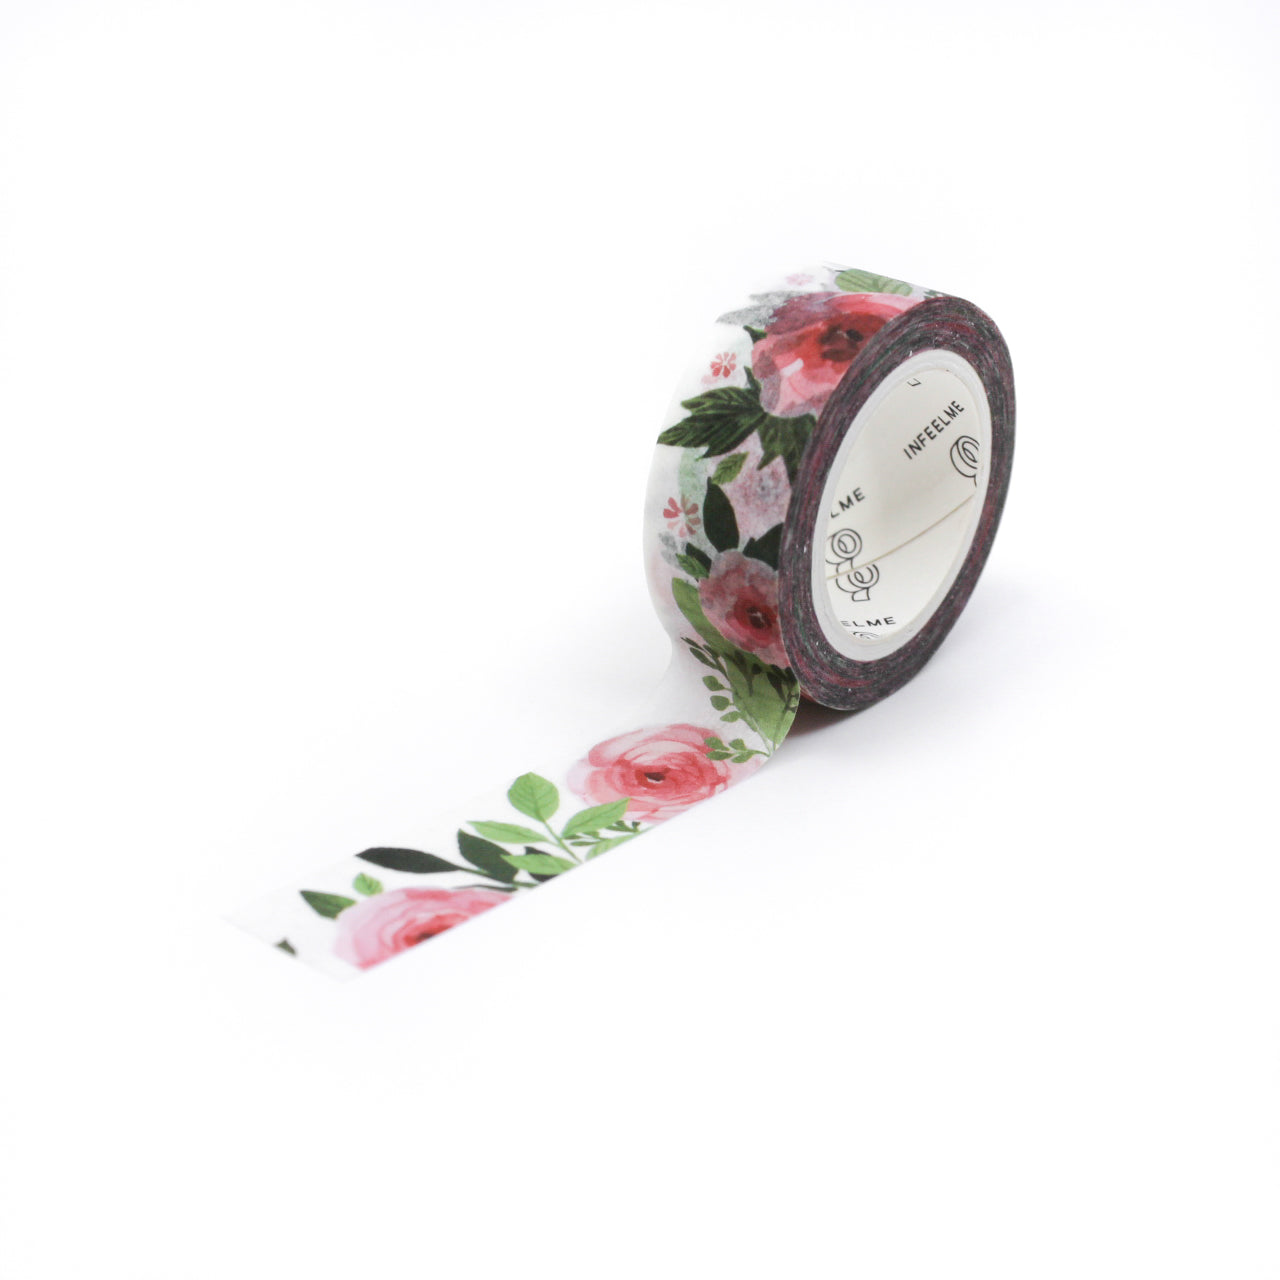 This pretty pink roses and Peony flower tape is a vibrant blooming floral pattern that is perfect for your BUJO and craft projects. Spring is in the air with this gorgeous tape sold at BBB Supplies Craft Shop.